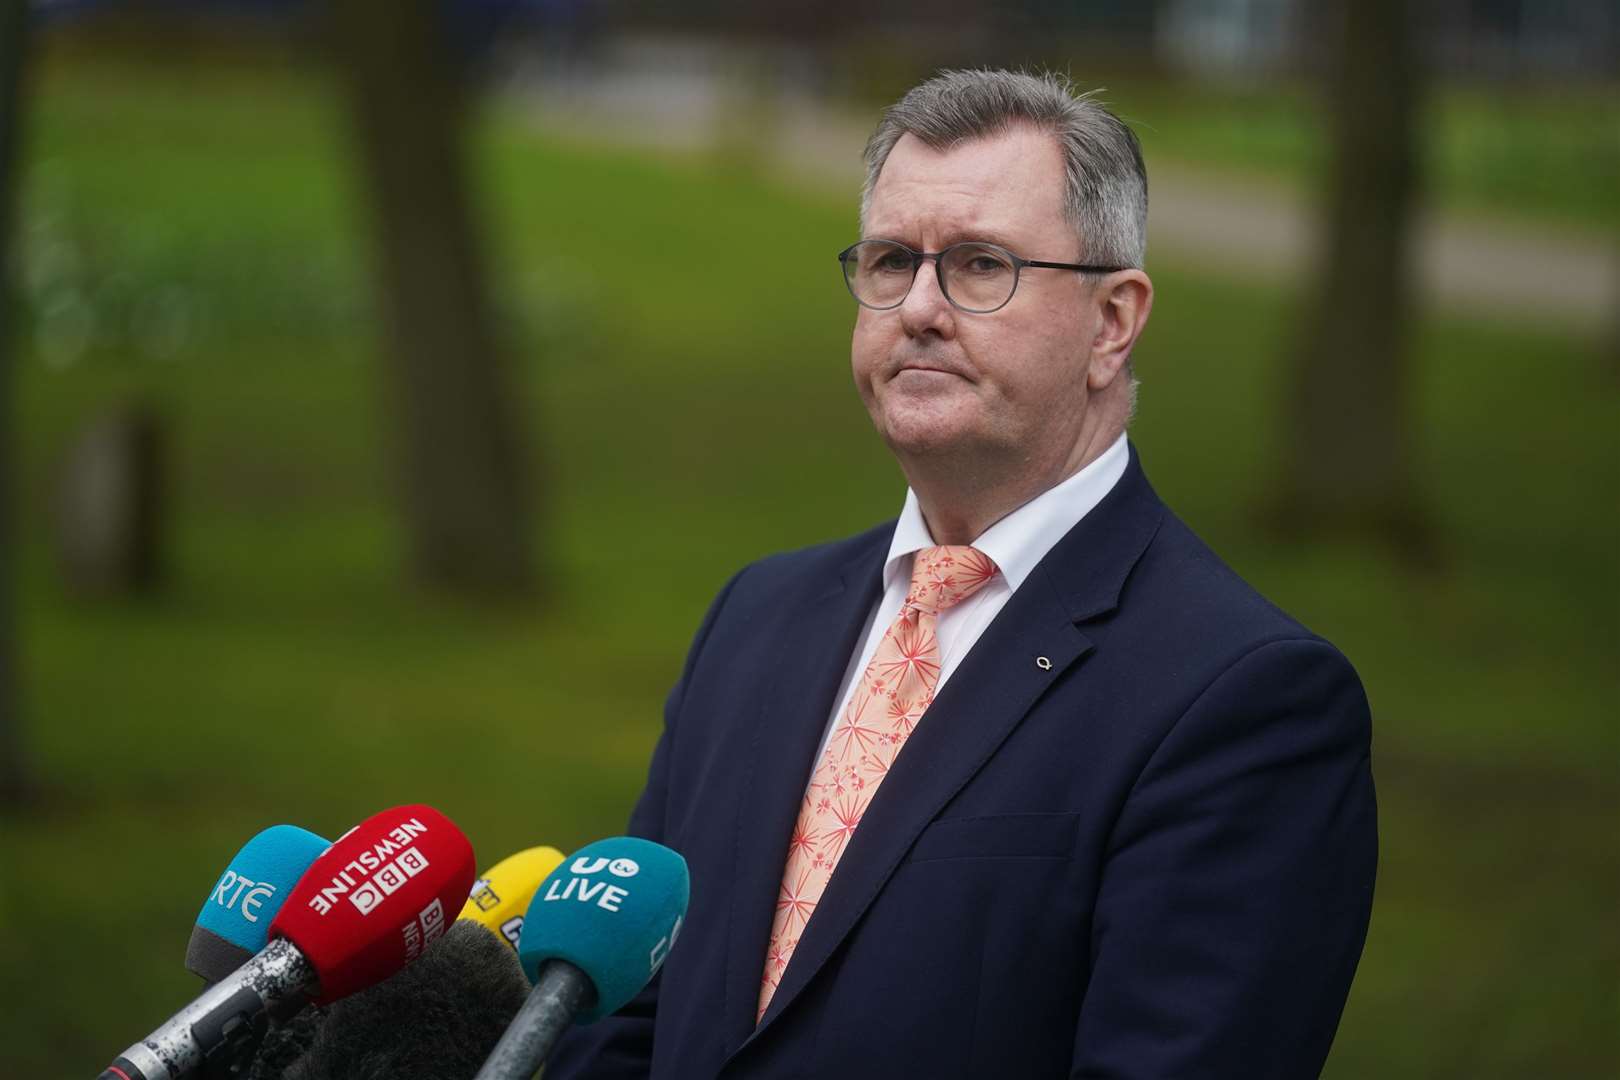 DUP leader Sir Jeffrey Donaldson has made clear his party will not return to powersharing until major changes are made to the Northern Ireland Protocol (Brian Lawless/PA)